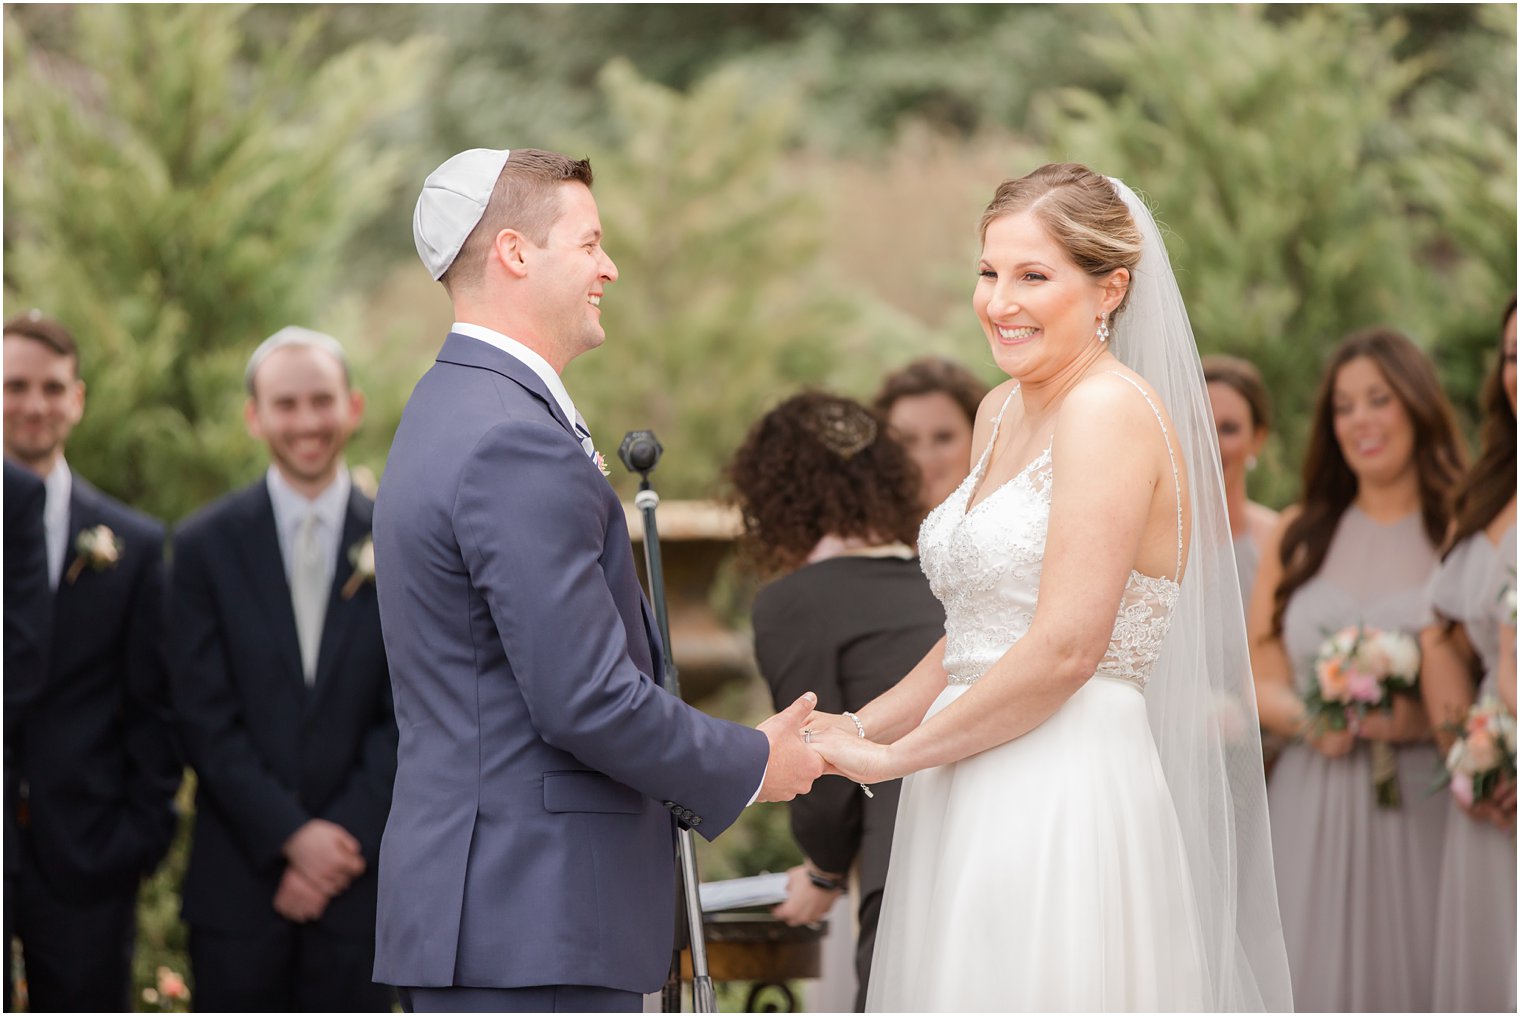 Outdoor wedding ceremony at The Mill Lakeside Manor Wedding